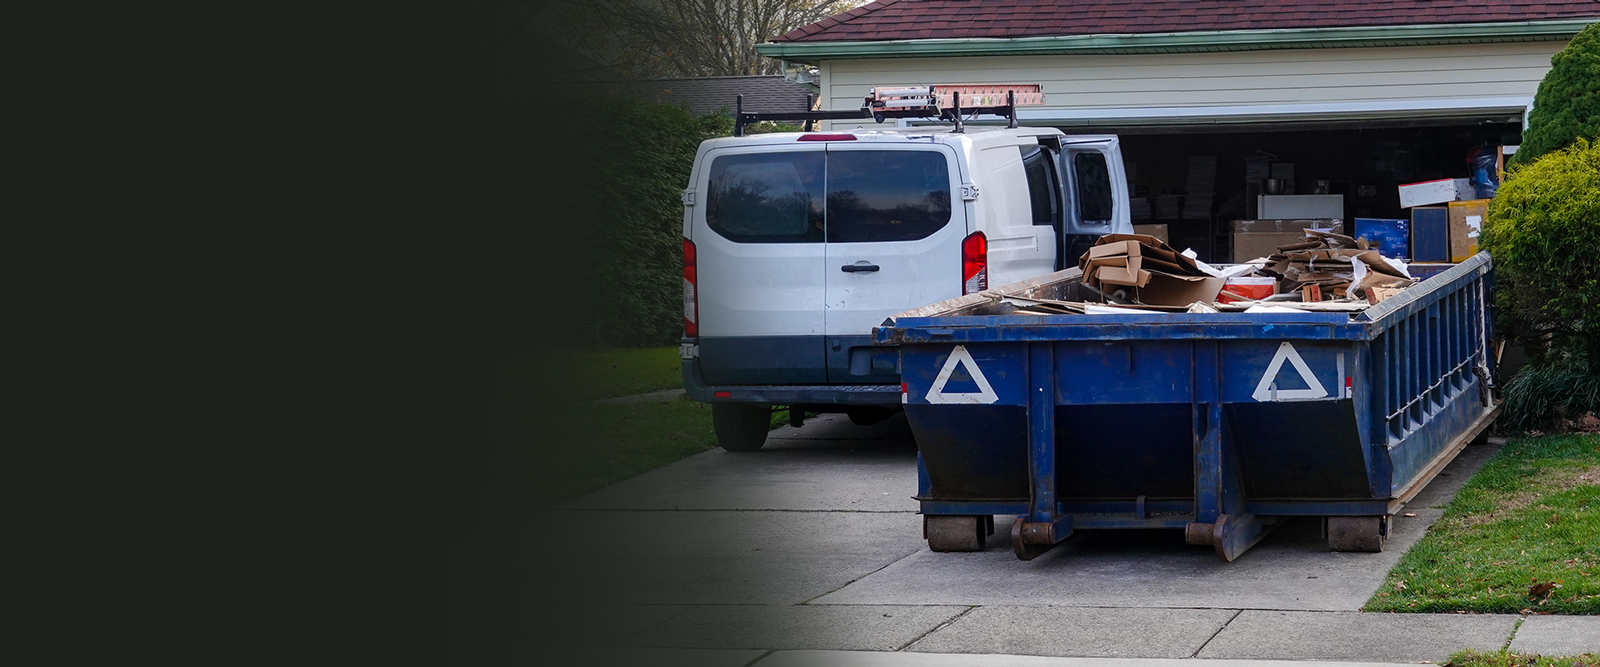 Read the blog by Scott's Rubbish Removal, an affordable Junk Removal Company in Langley